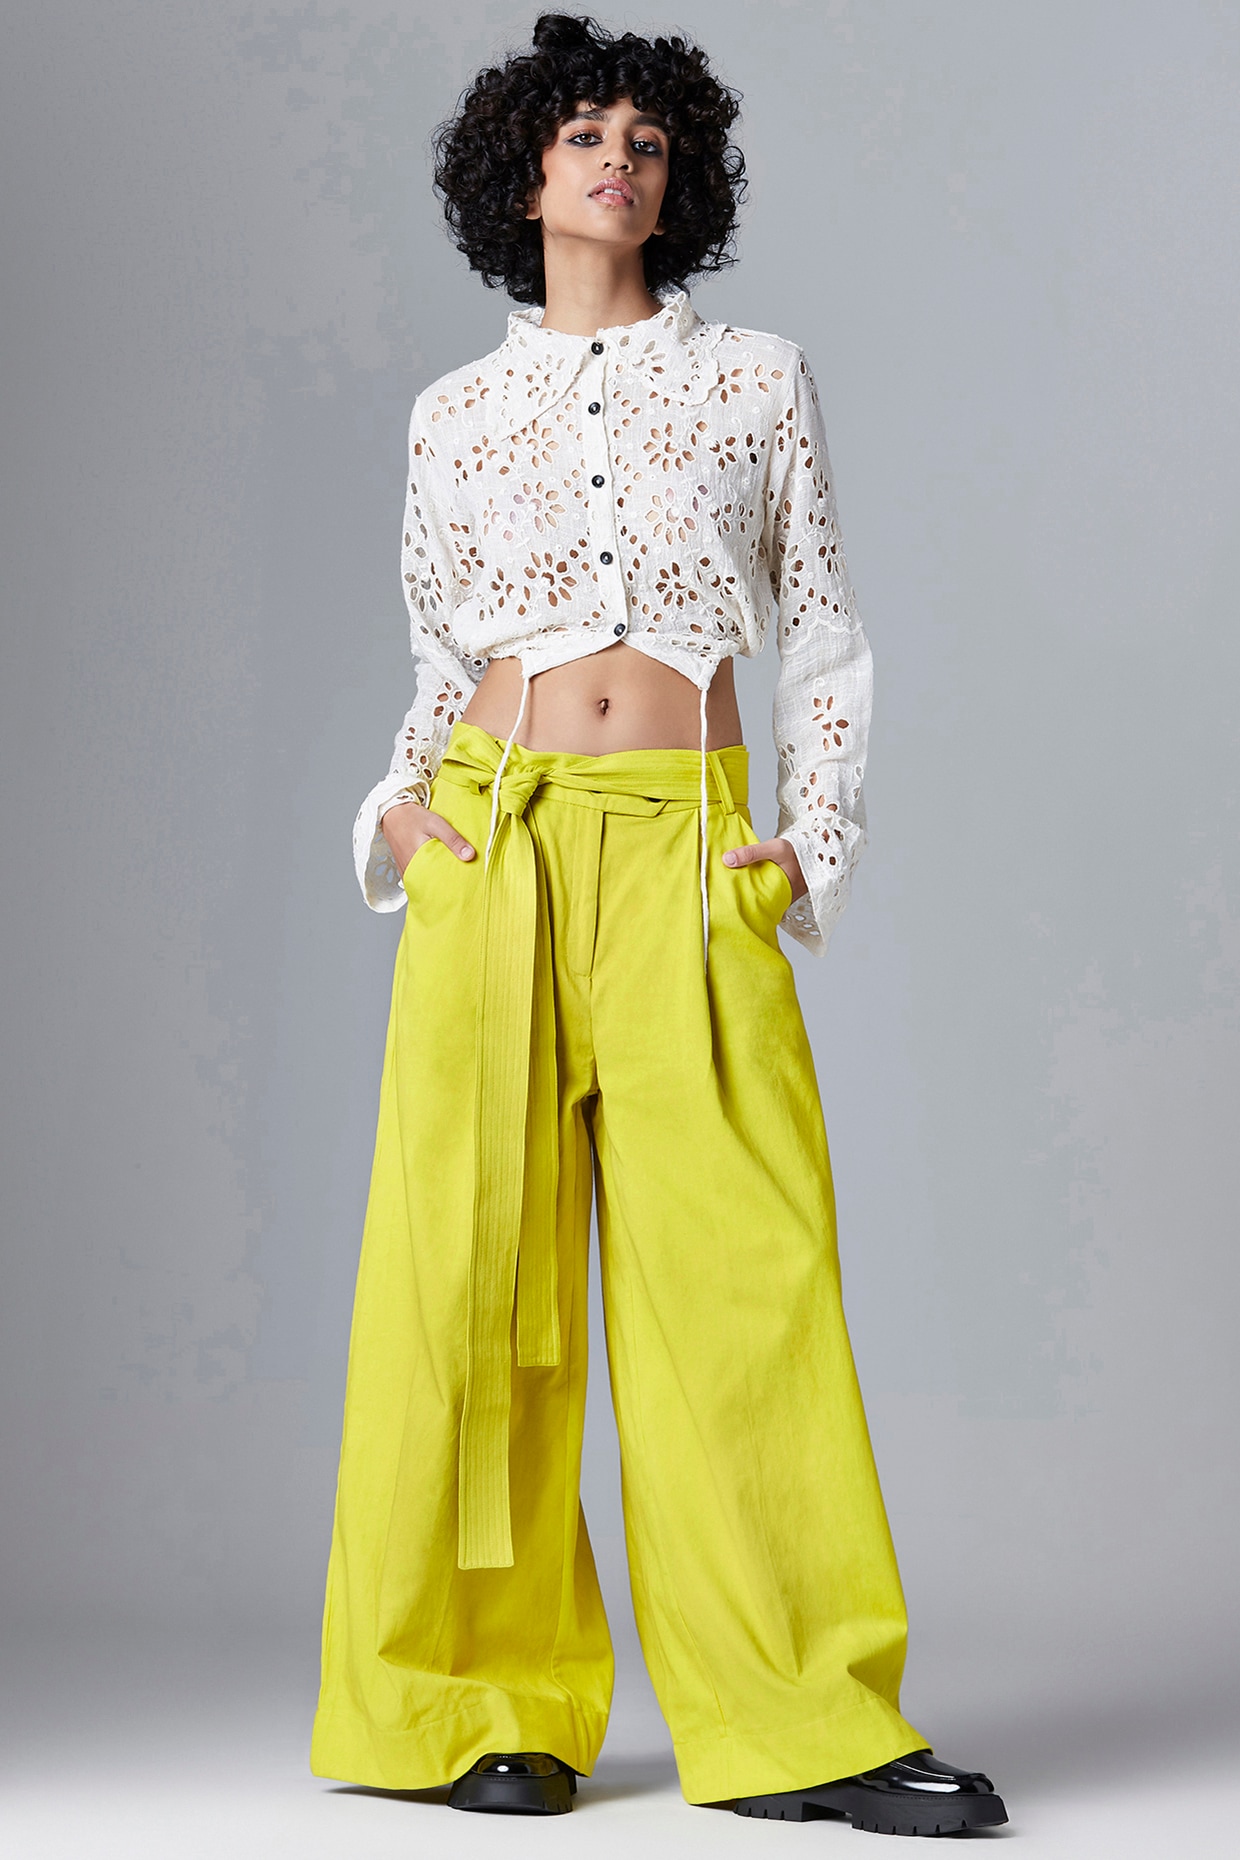 OffWhite Floral Motif Trousers Design by FEBo6 at Pernias Pop Up Shop 2023